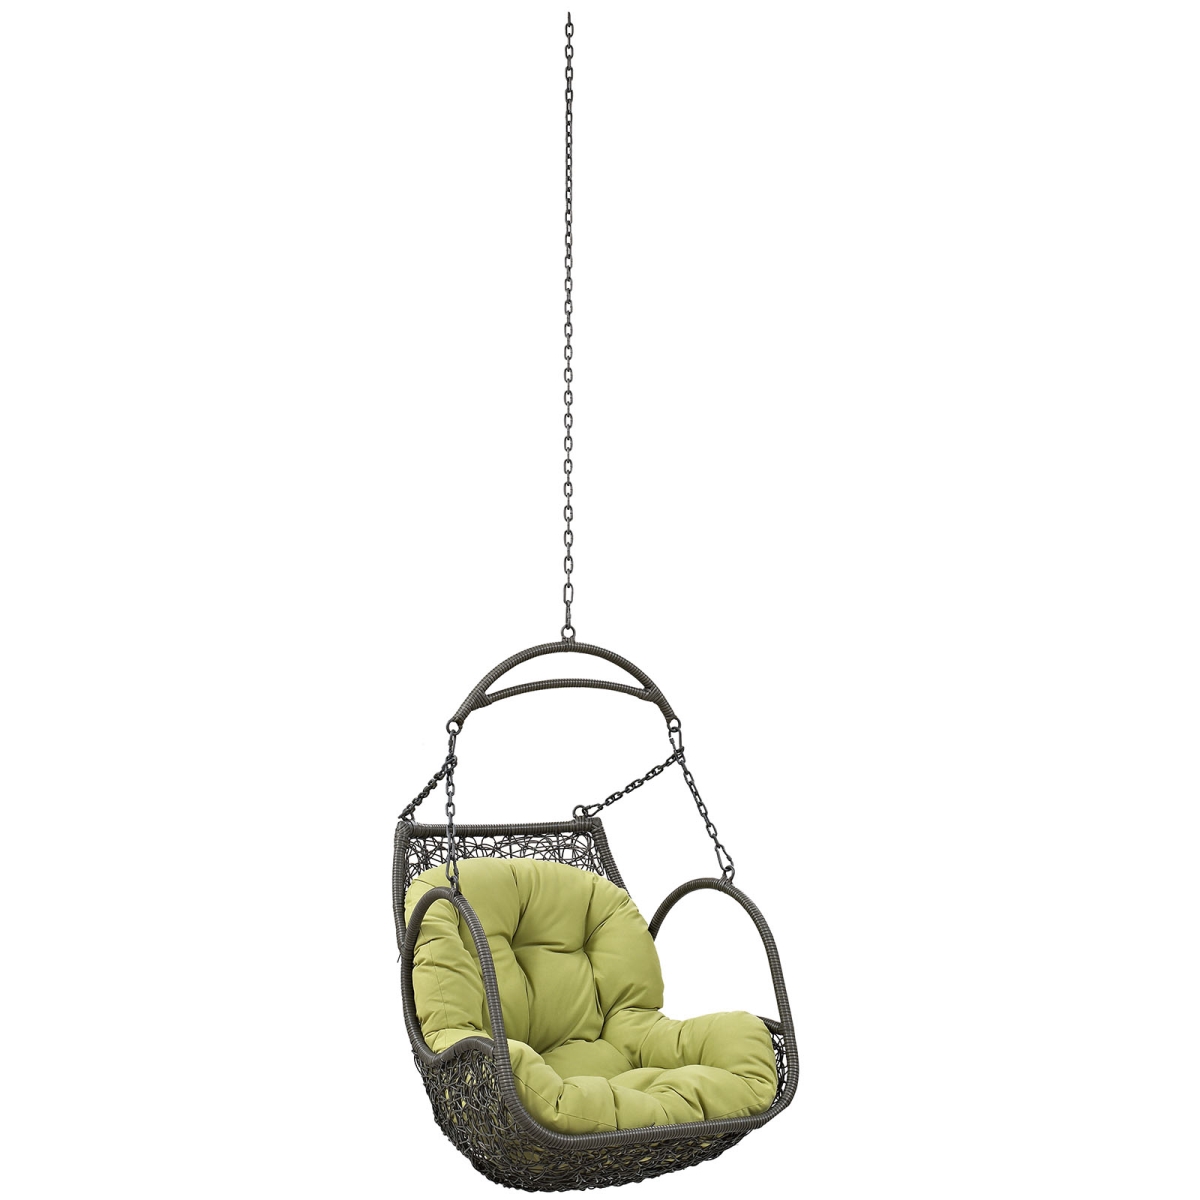 Modway Eei-2659-per-set 127.5 H X 29.5 W X 24.5 L In. Arbor Outdoor Patio Swing Chair Without Stand, Peridot